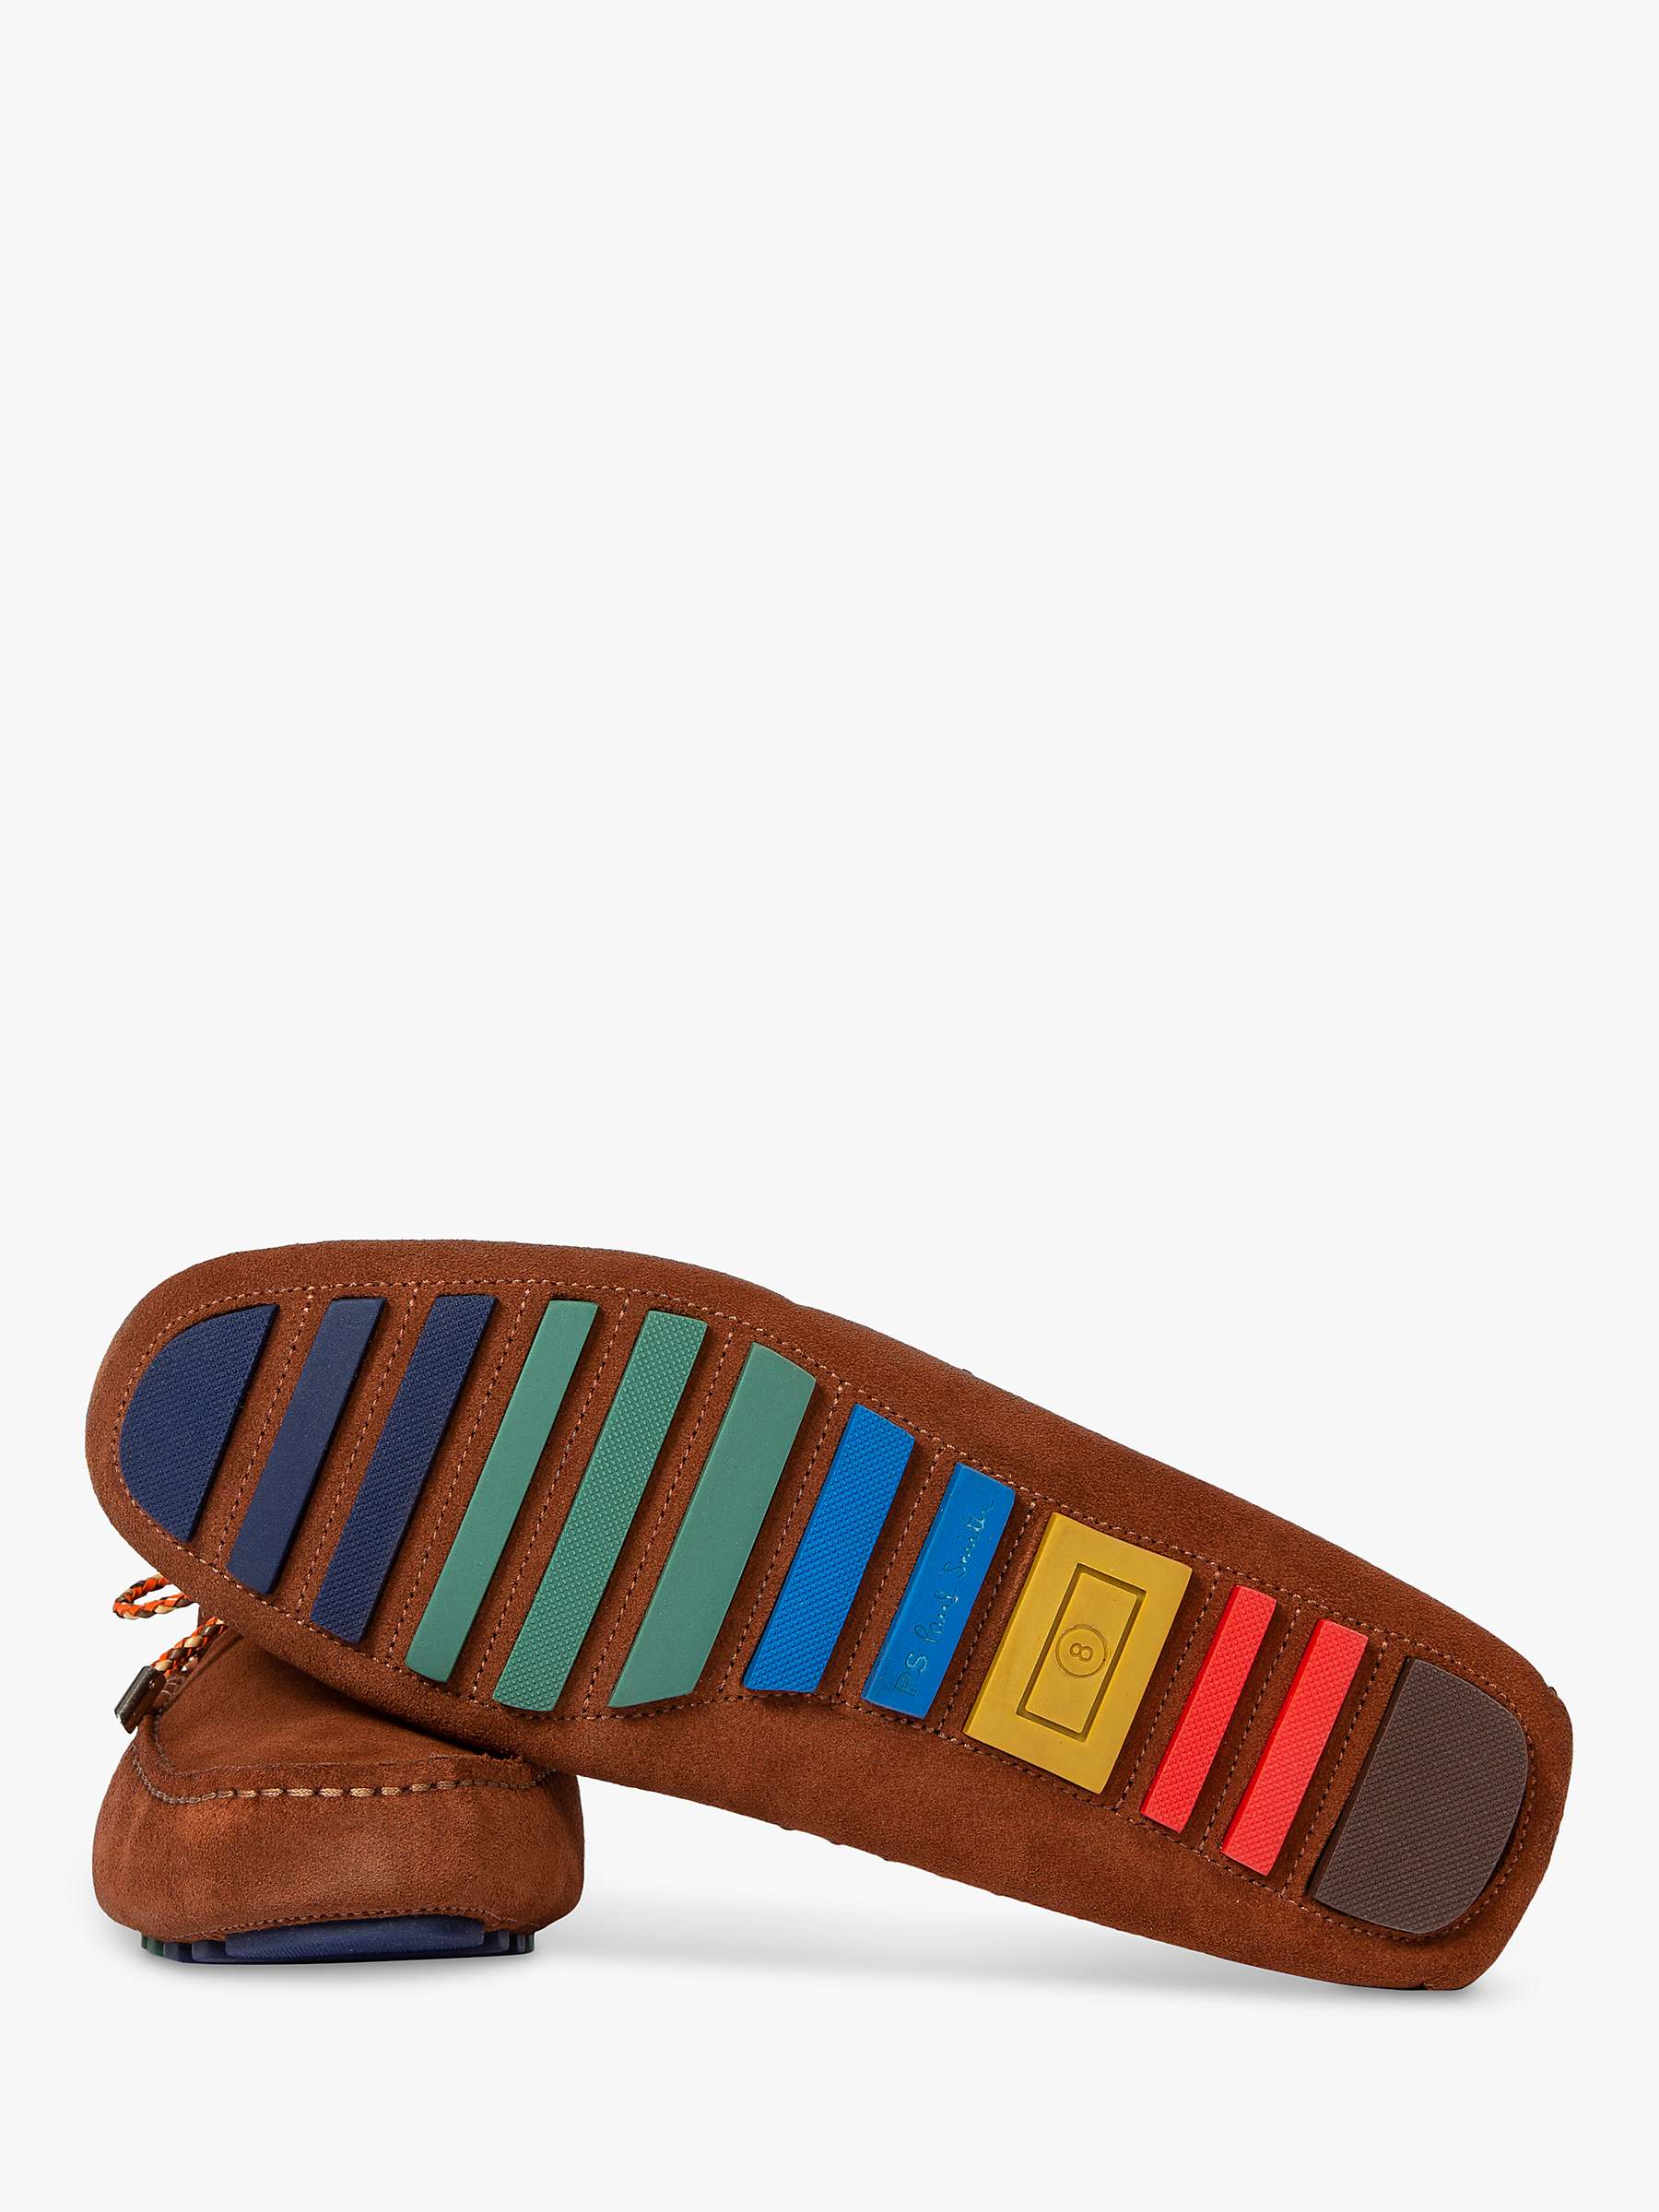 Buy Paul Smith Springfield Suede Loafers Online at johnlewis.com